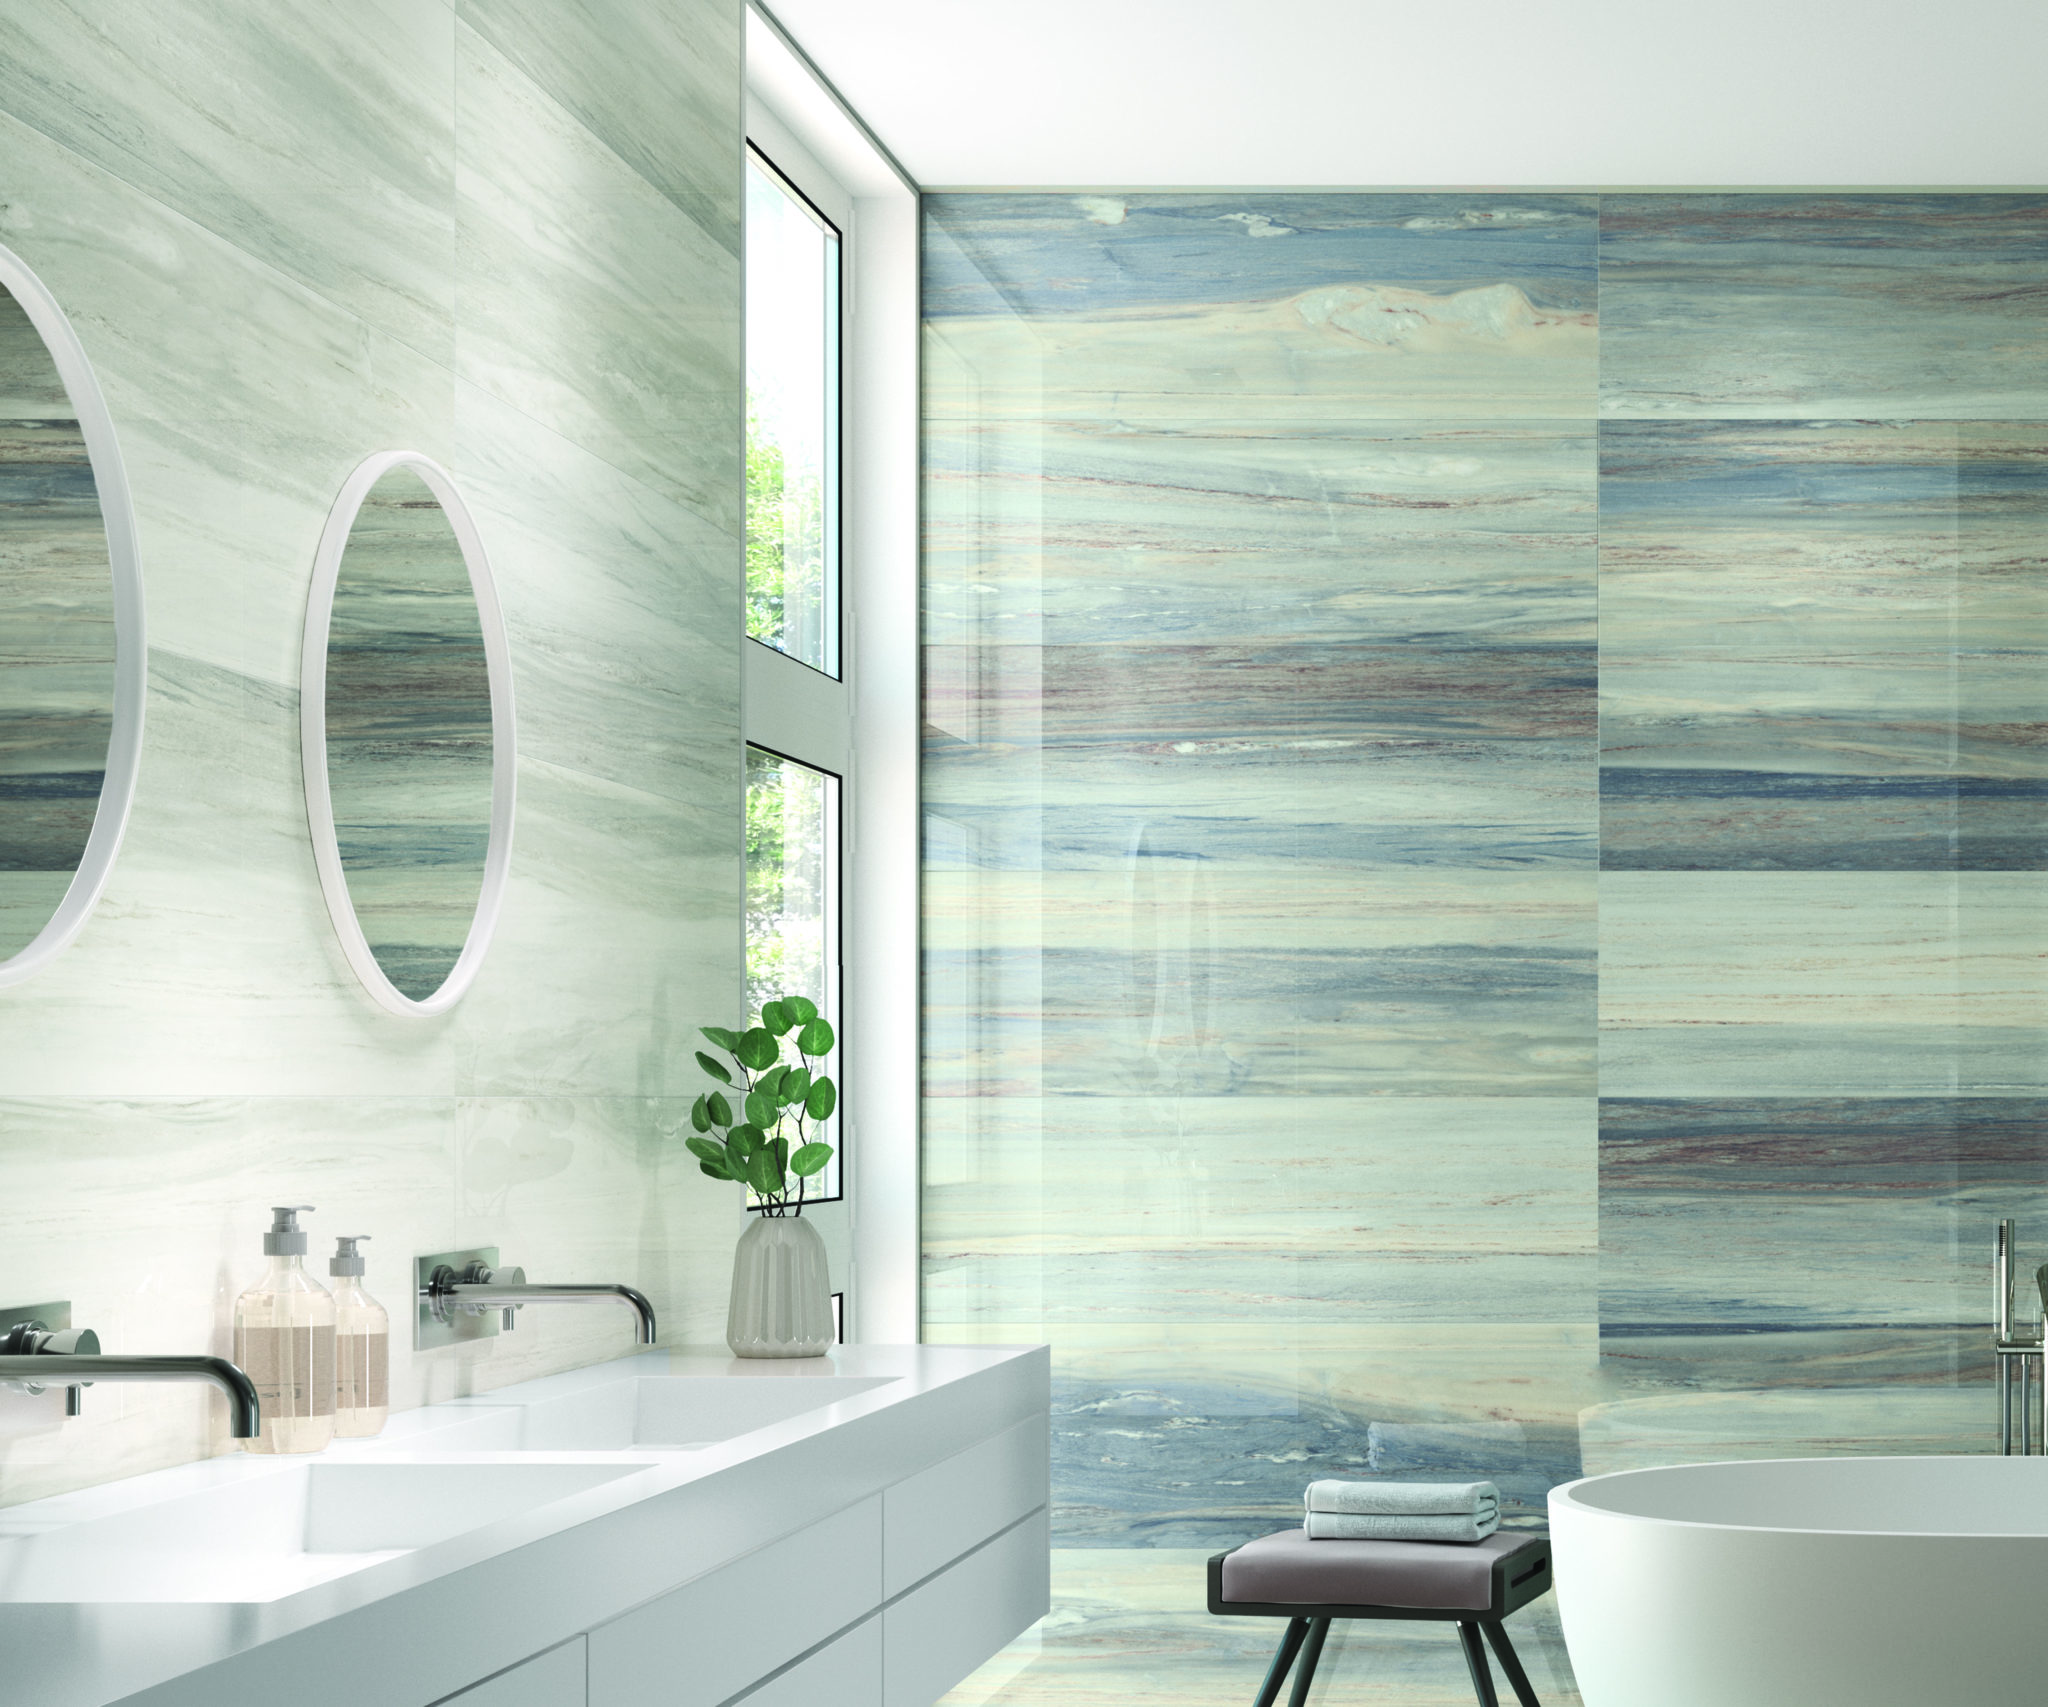 How to Incorporate Ceramic and Porcelain Tile into Current Design